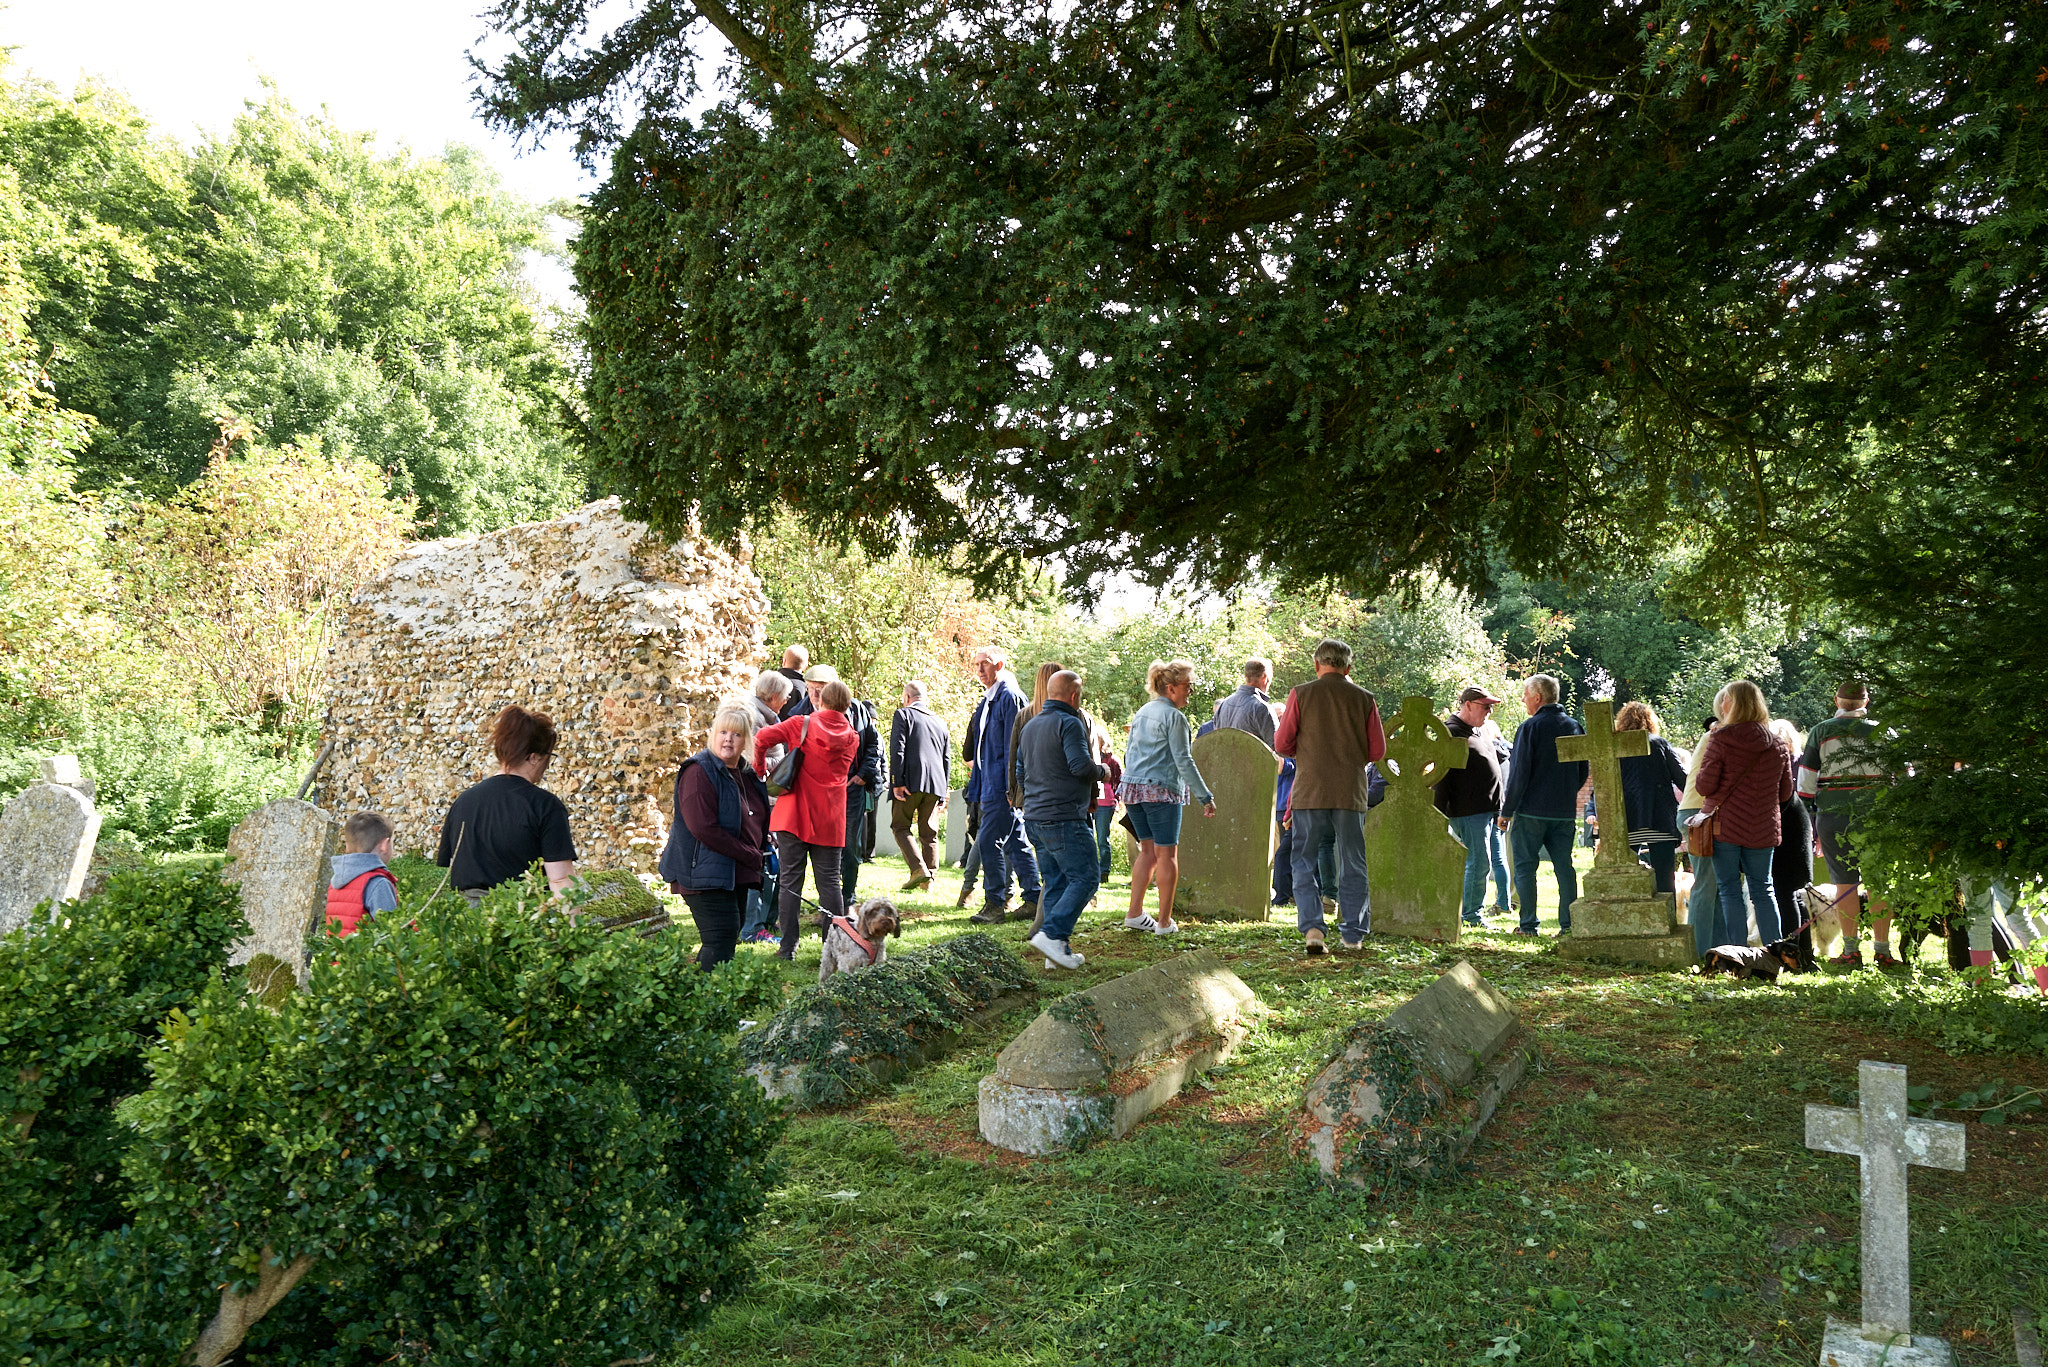 Lidgate celebrates the opening of the Castle and Dam Walk